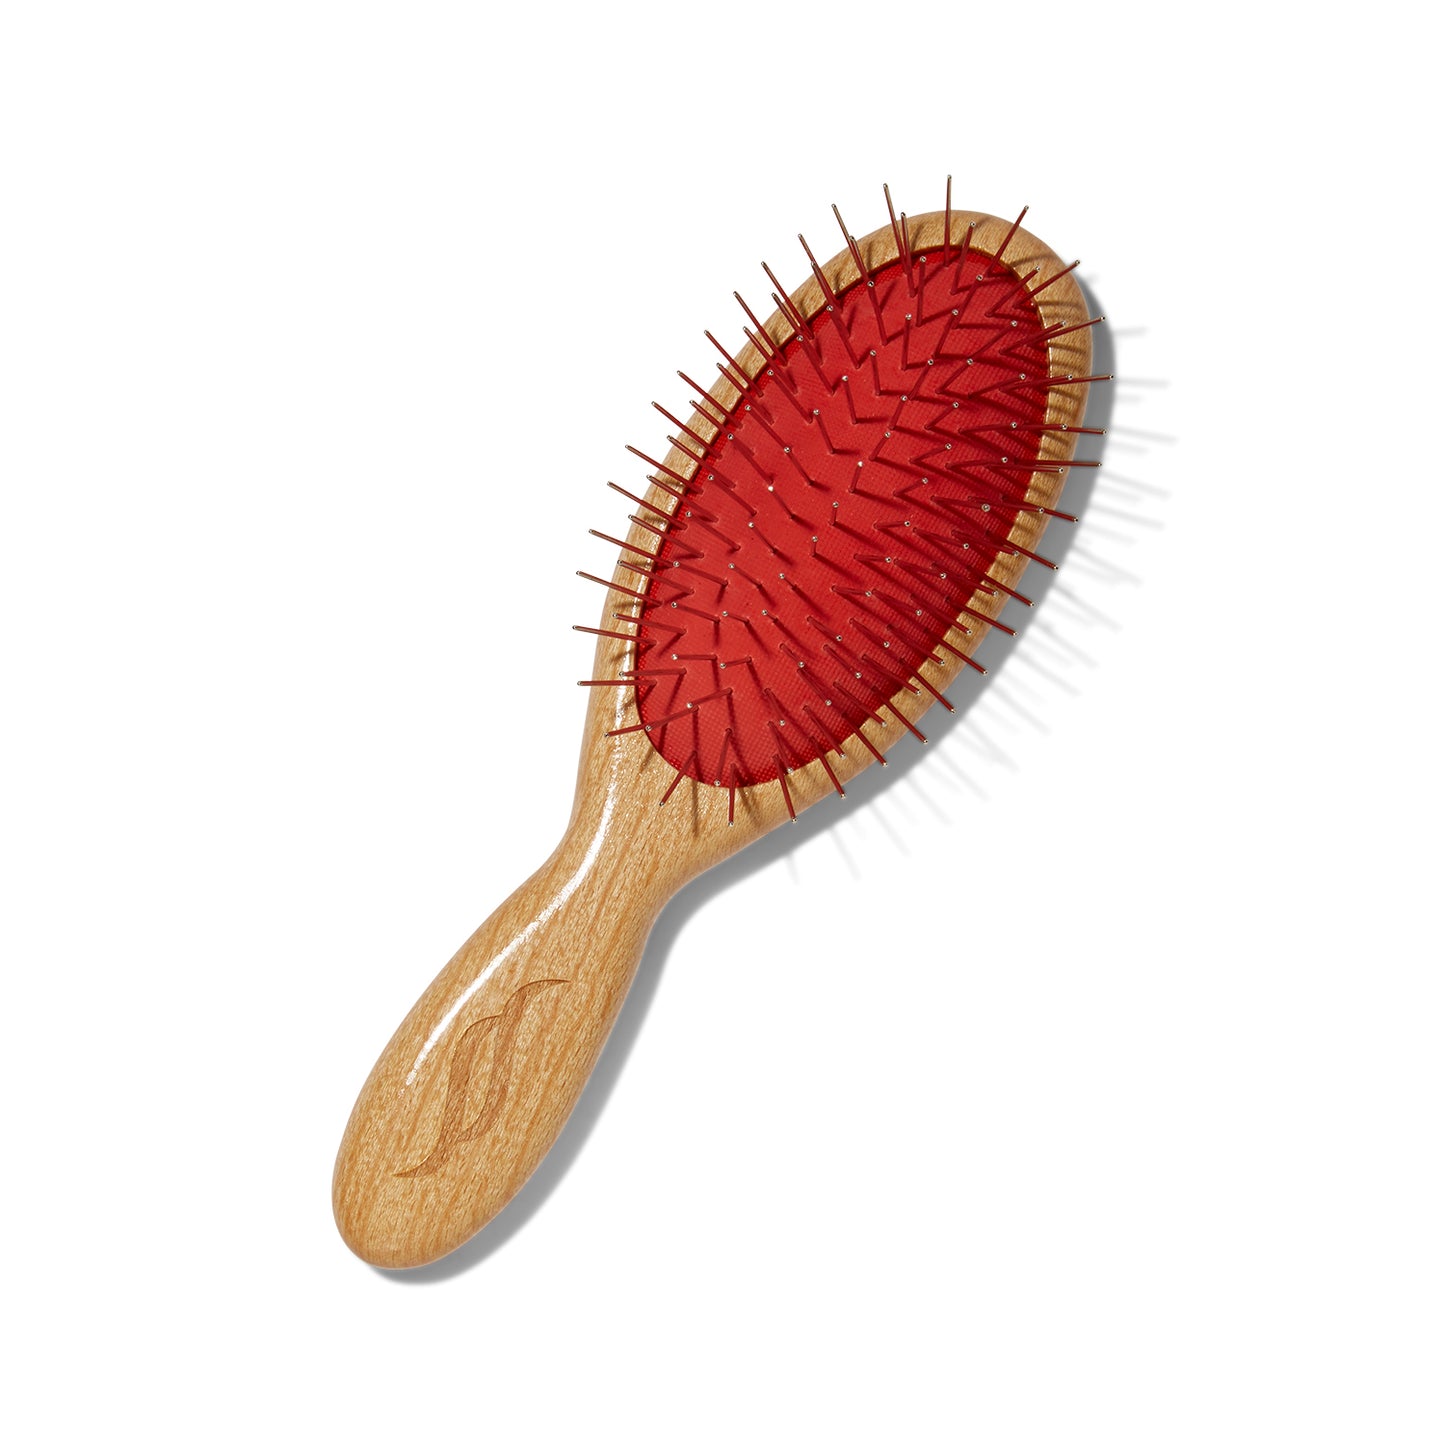 Front view of the Sheila Stotts Travel Size Untangle Hair Brush. The handle is a light wood, the tines are silver metal and the rubber the times are embedded in is deep pink.